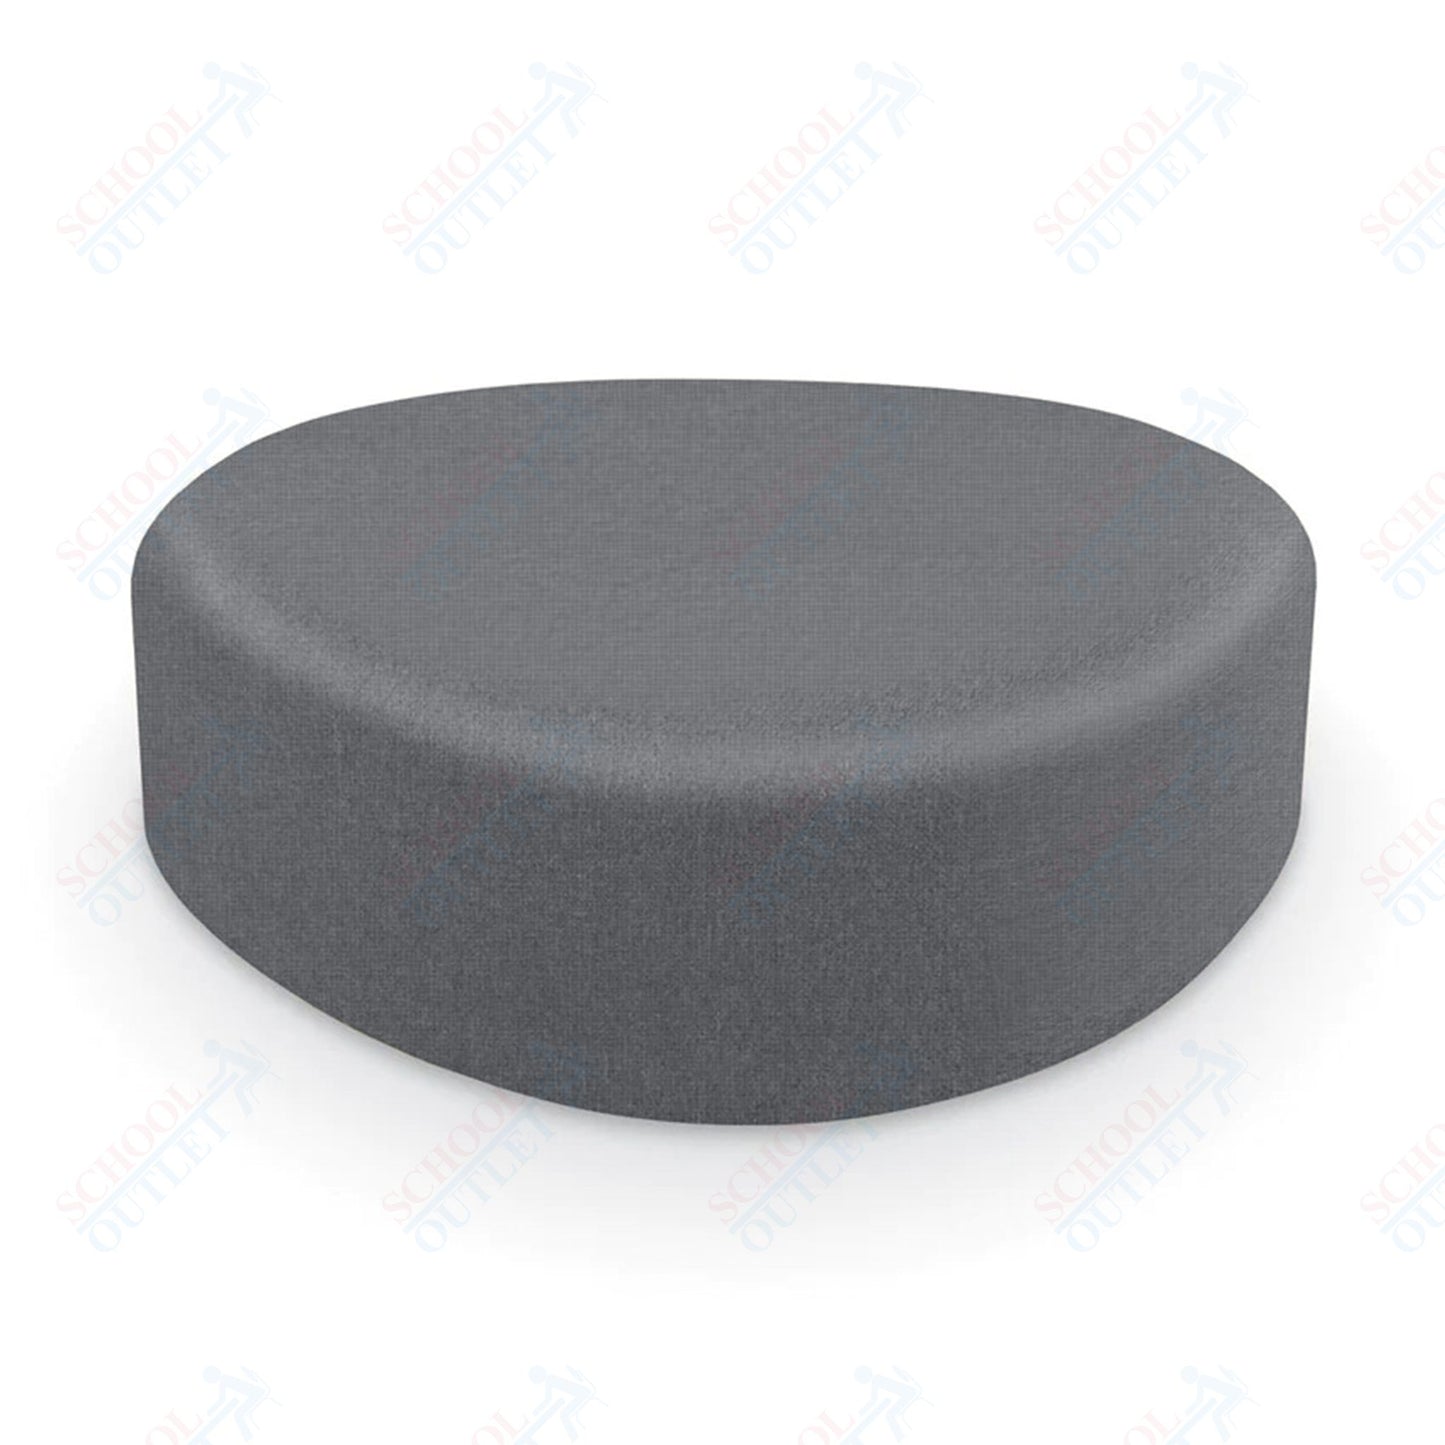 Mooreco Akt Soft Seating Lounge Large Ottoman - Grade 02 Fabric and Powder Coated Sled Legs